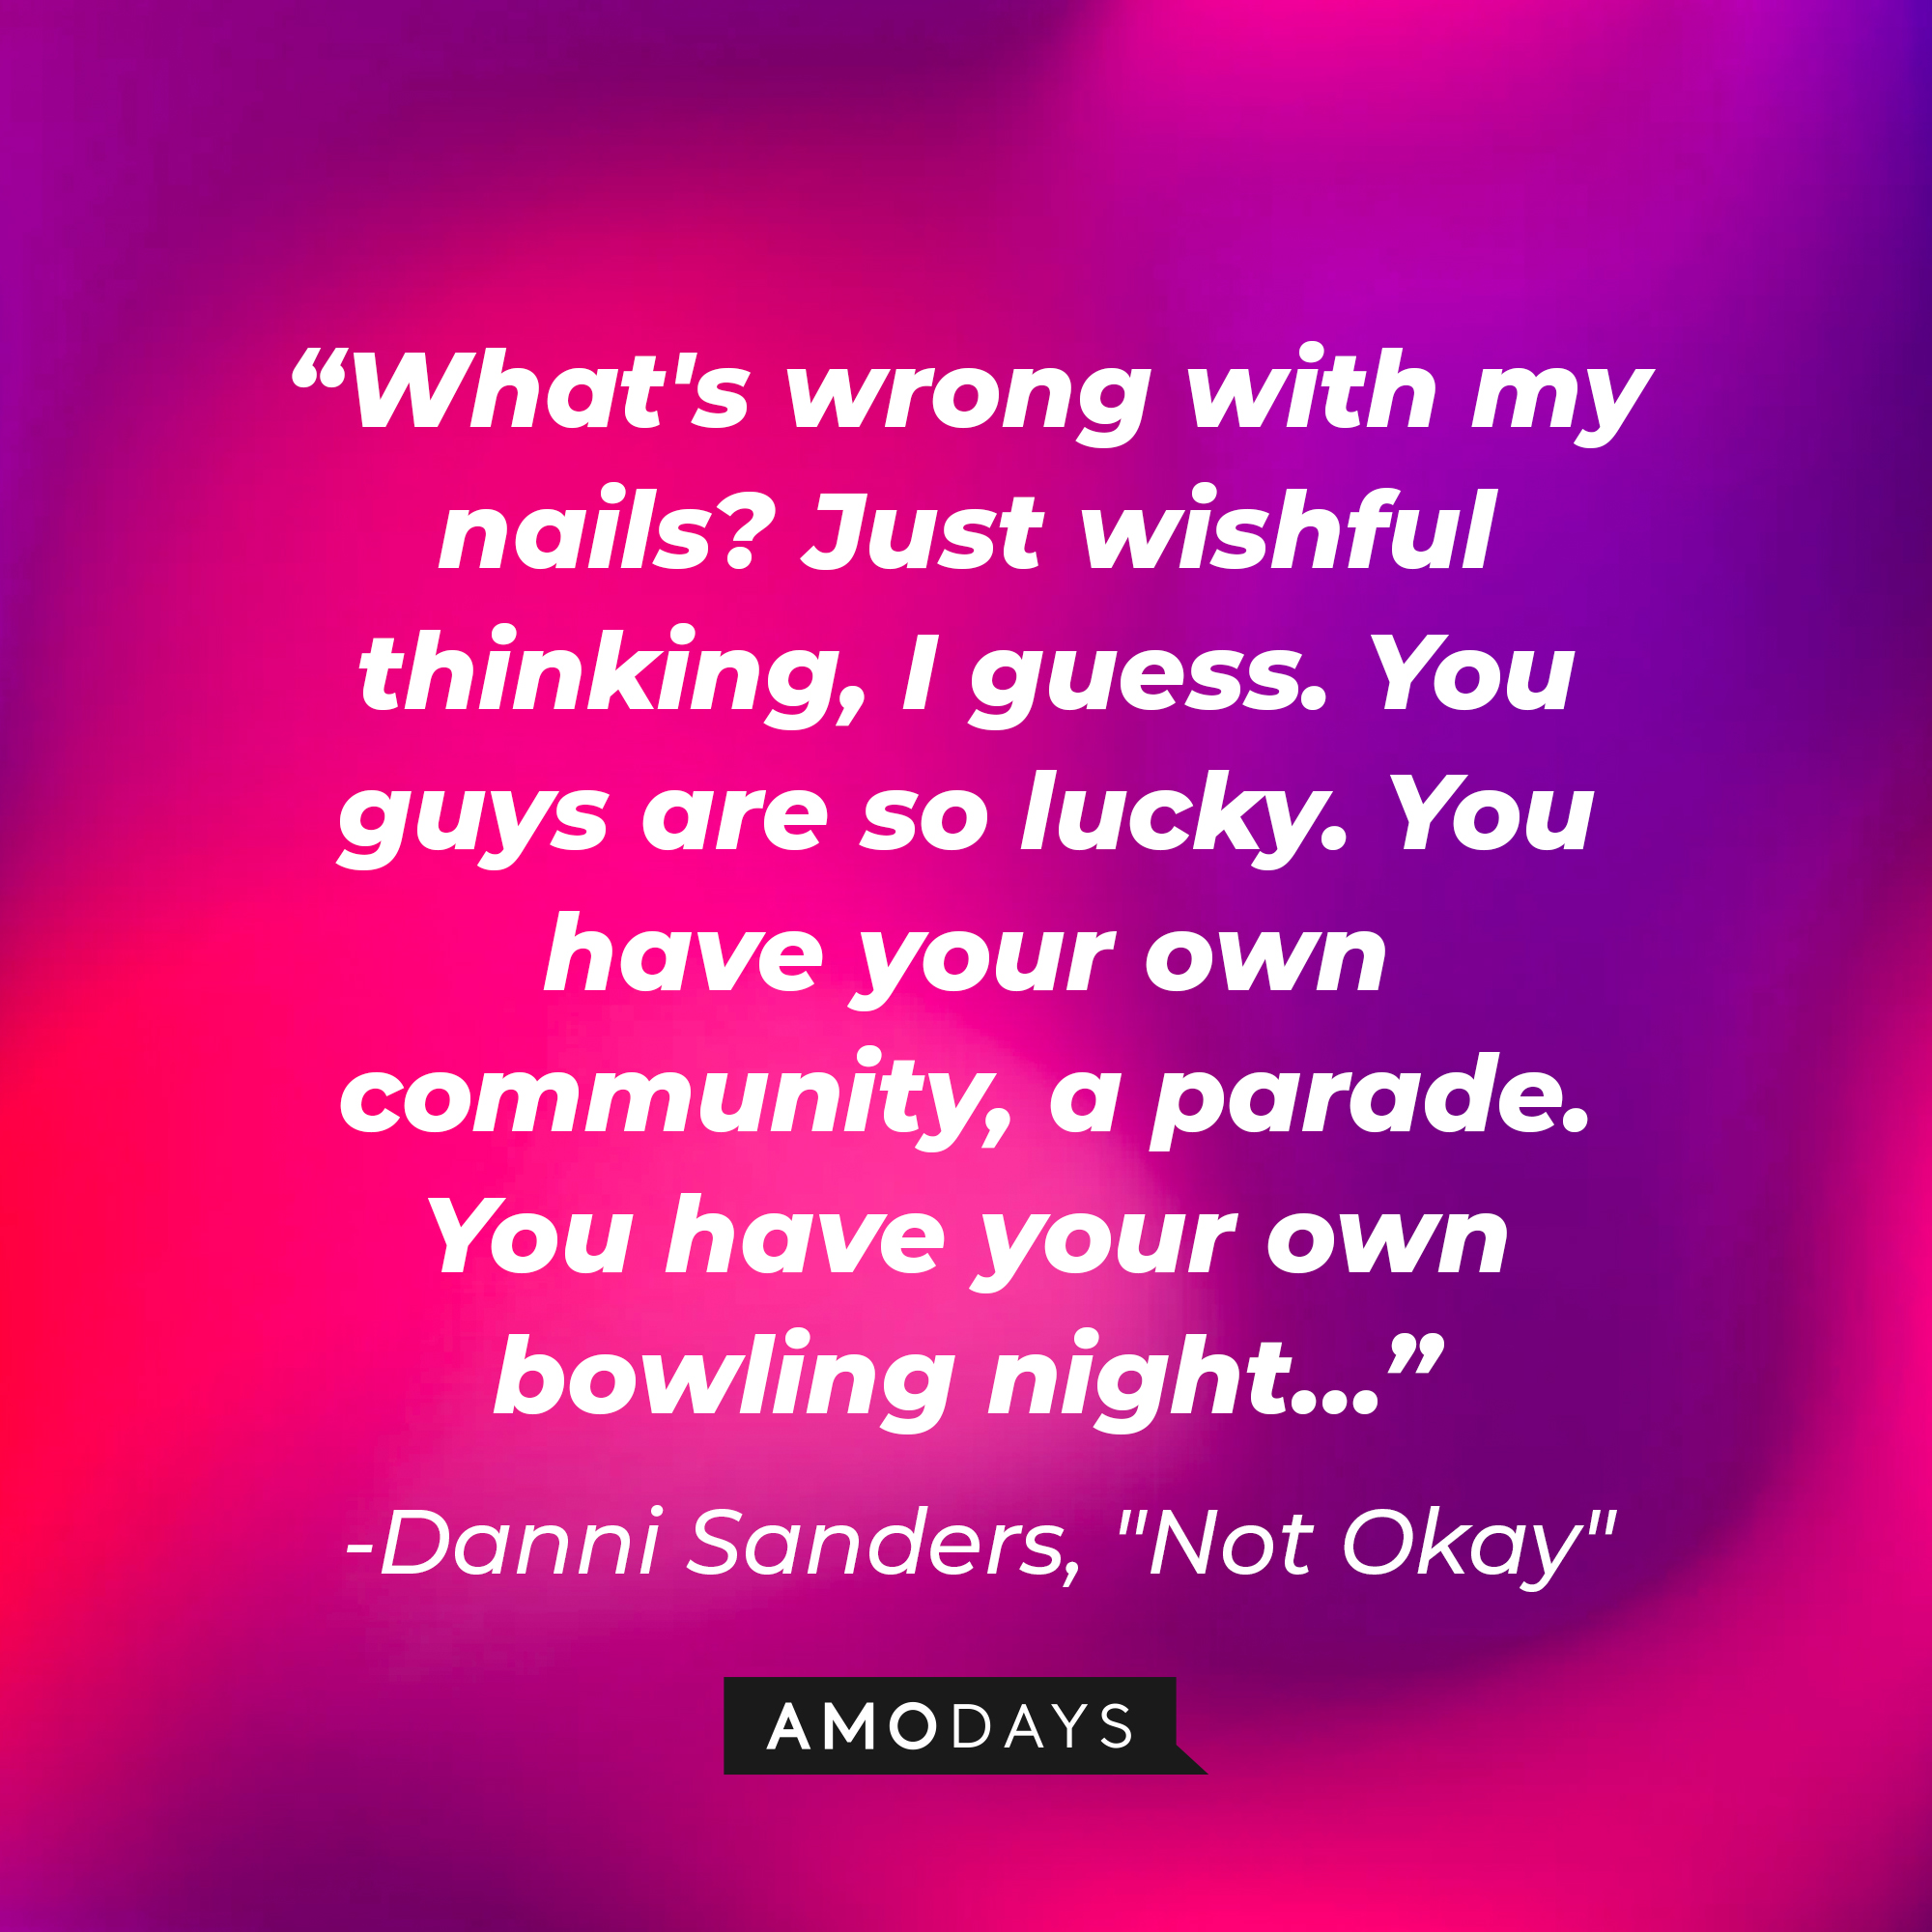 Danni Sanders' quote: "What's wrong with my nails? Just wishful thinking, I guess. You guys are so lucky. You have your own community, a parade. You have your own bowling night…" | Source: AmoDays